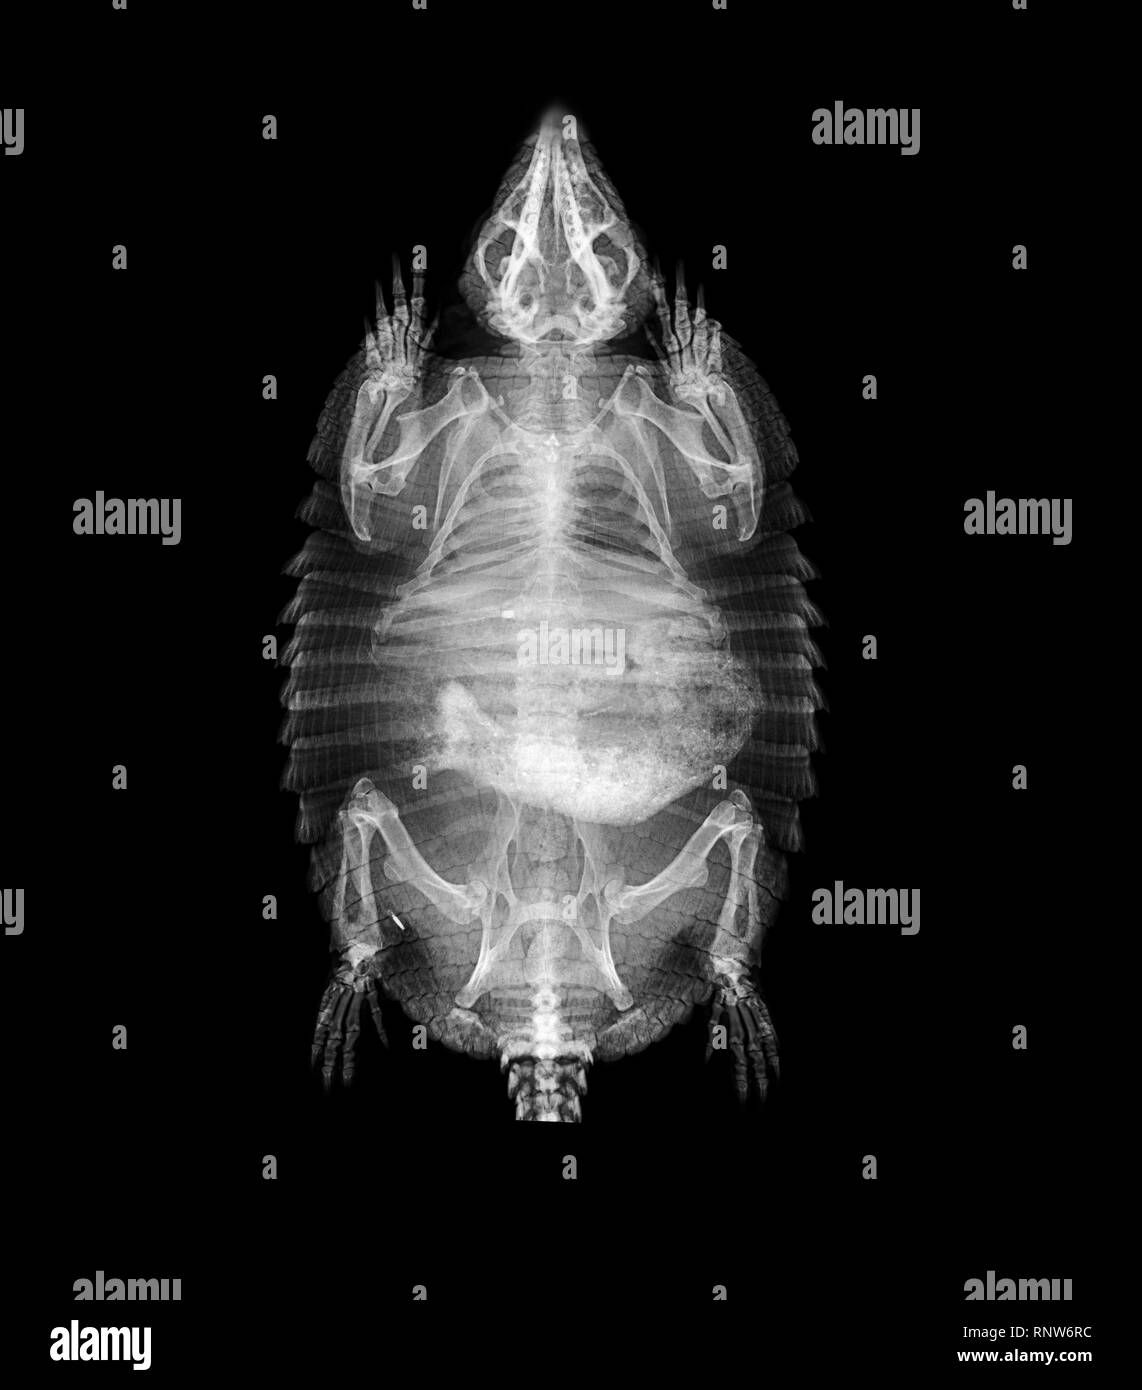 X-RAY VISION: ZSL London Zoo has shared a selection of amazing x-ray images, taken during routine health checks of its 18,000 animals.    The images, taken by the Zoo’s expert veterinary team at the on-site clinic reveal the inner workings of a variety of different species, including frogs, snakes, geckos and turtles.   ZSL London Zoo veterinary nurse Heather Mackintosh says: “We can tell so much about an animal’s health from looking at an x-ray - from the strength of their bones to how healthy their heart is.   “They’re vital to our work, and even though we get to see unique x-rays fairly oft Stock Photo